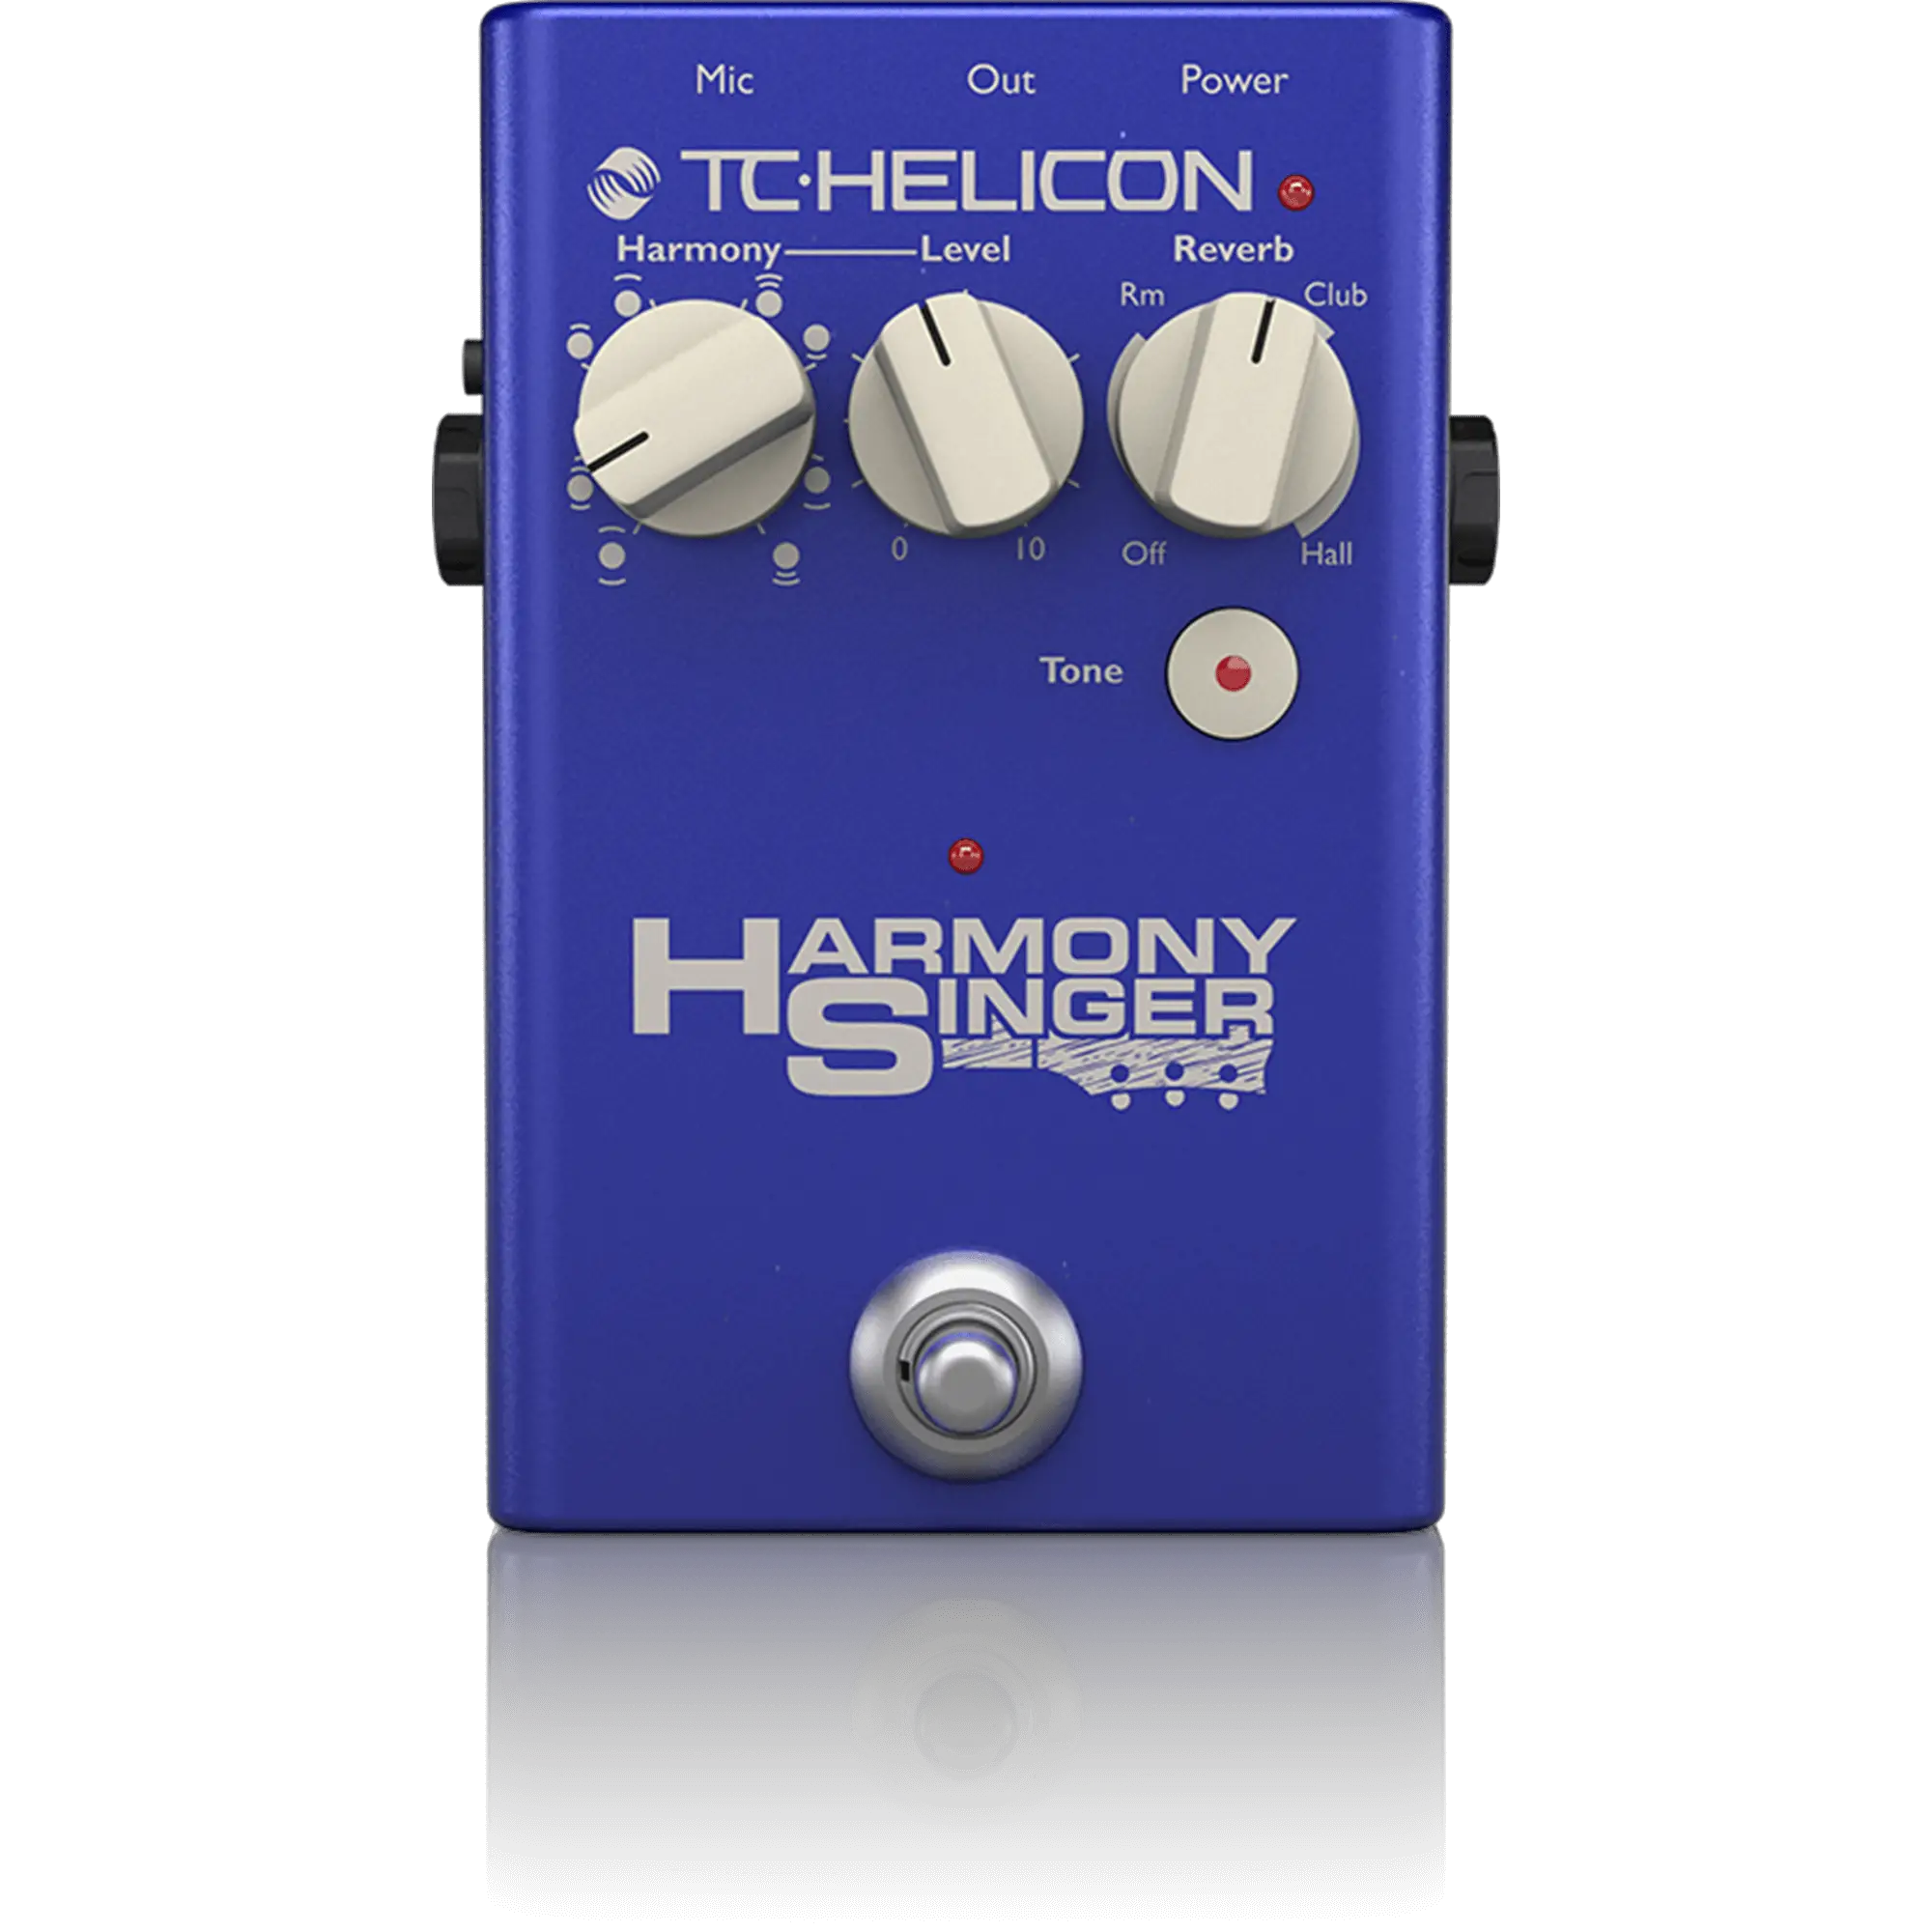 TC Helicon Harmony Singer 2 Review, best harmony pedal for vocals